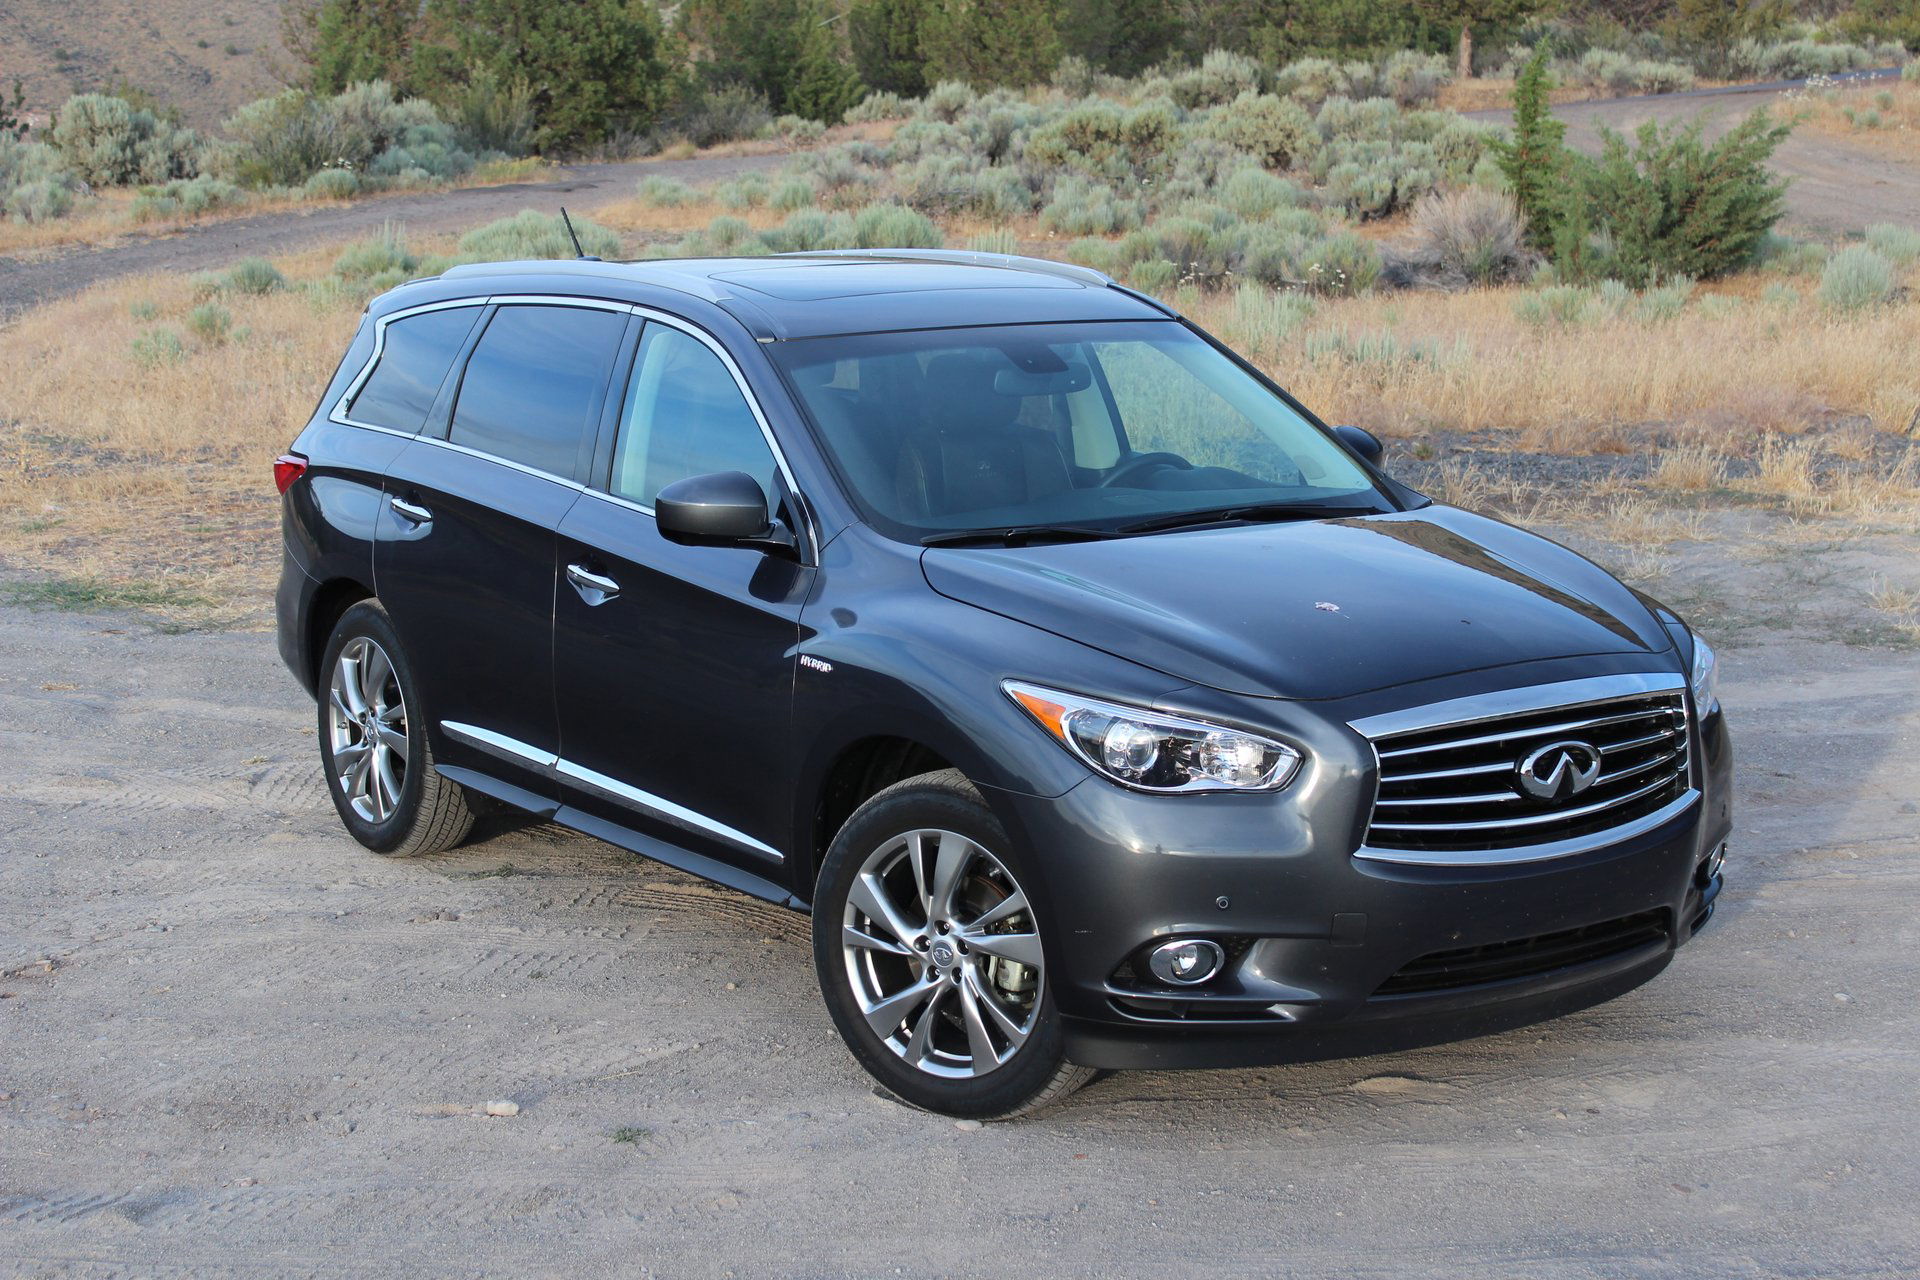 Used cars to avoid - 2014-infiniti-qx60 via The Car Connection.